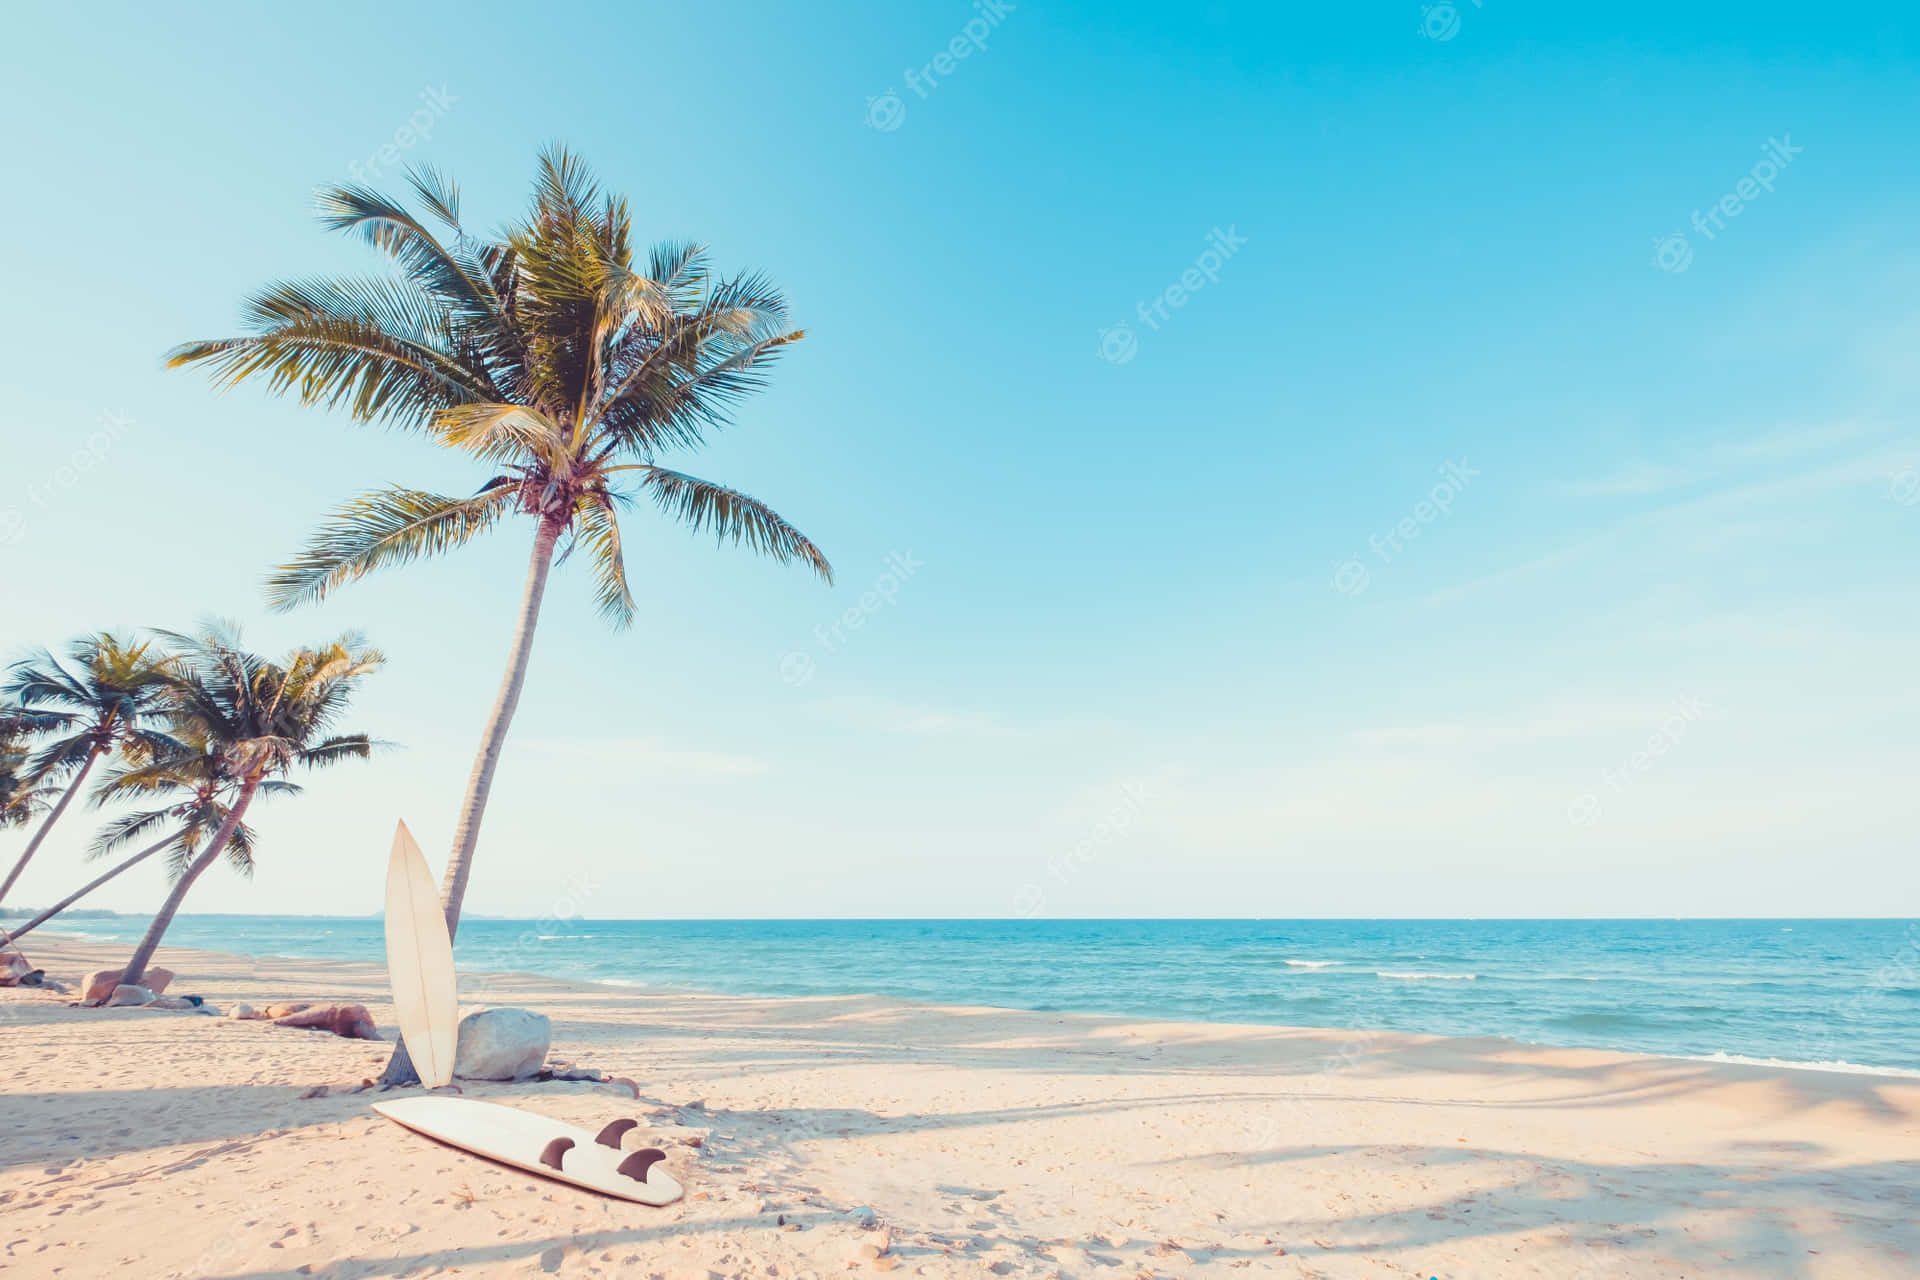 A Beach With Palm Trees And A Surfboard